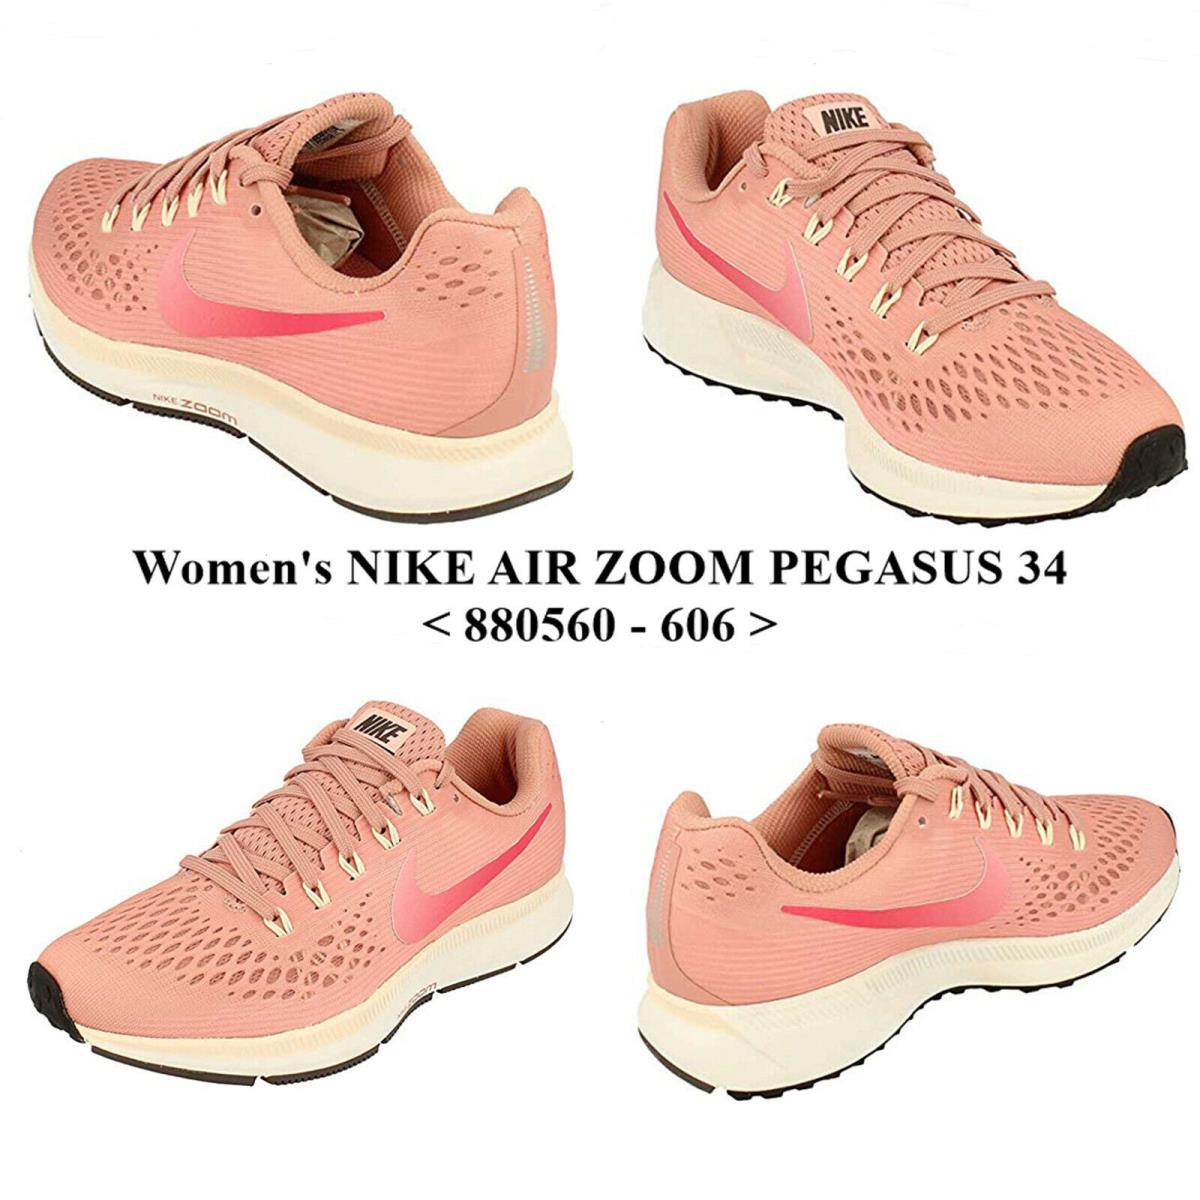 Women`s Nike Air Zoom Pegasus 34 <880560 - 606> Running/casual Shoe.new with Box